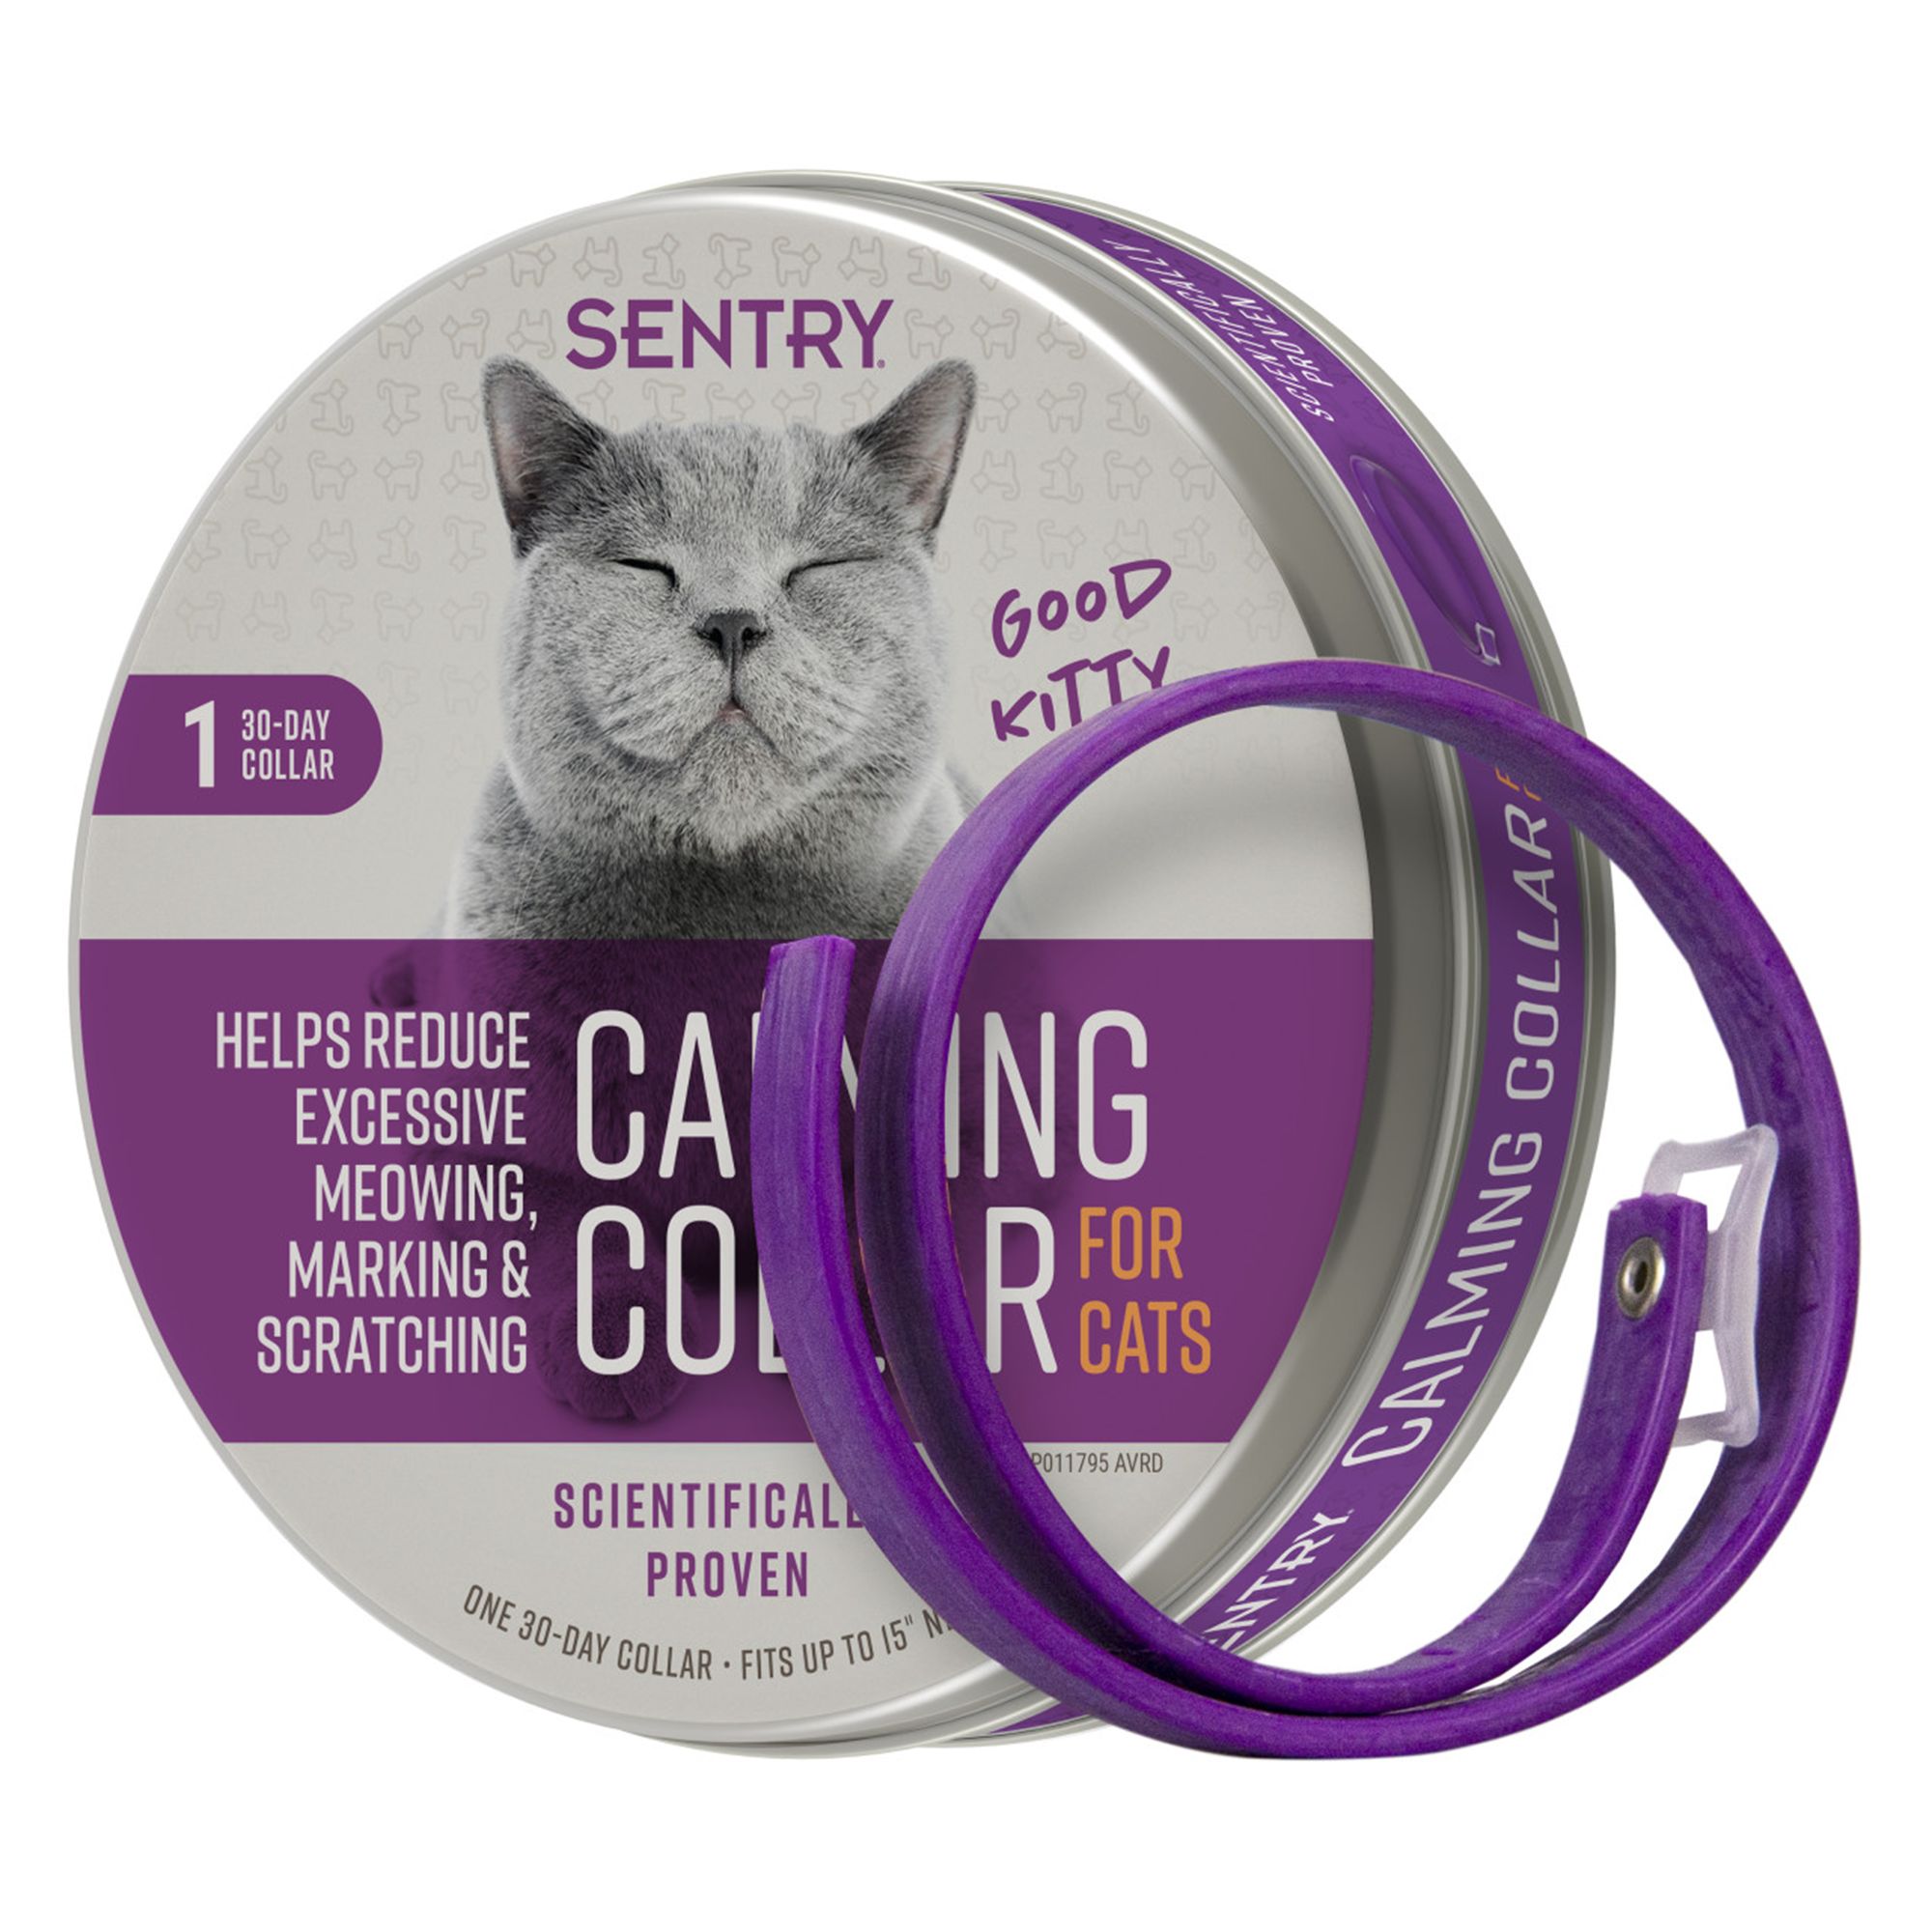 sentry calming collar for cats 3 pack